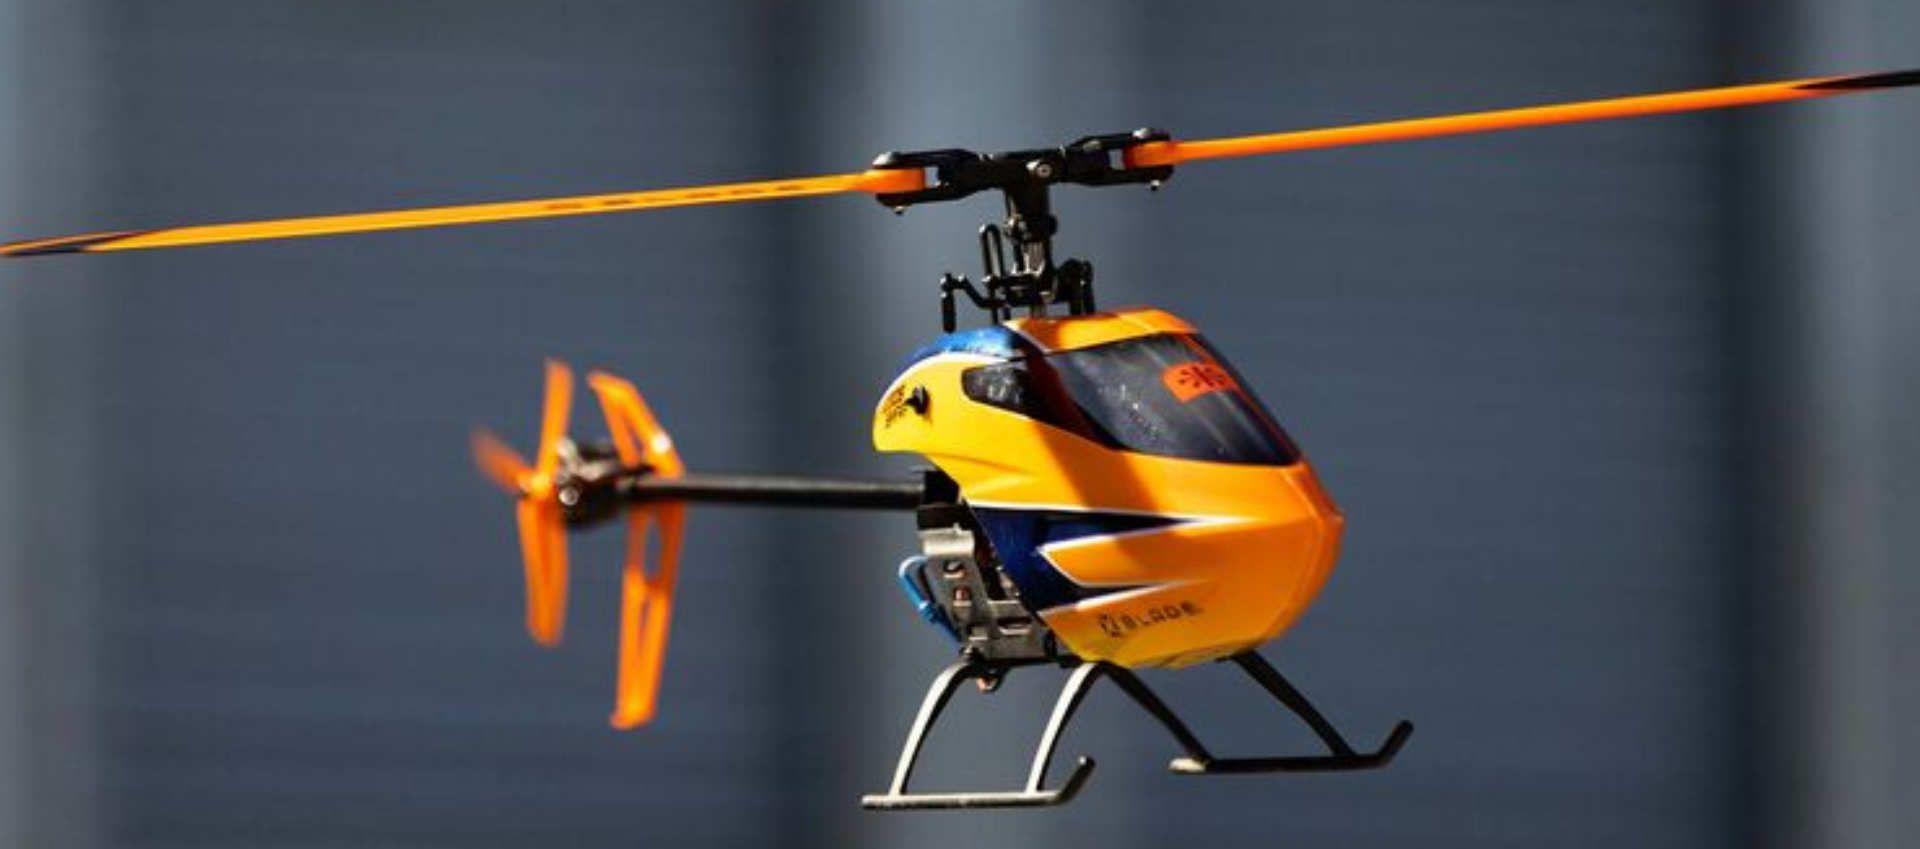 Remote Control Flying Helicopter Price: Factors Affecting RC Helicopter Prices